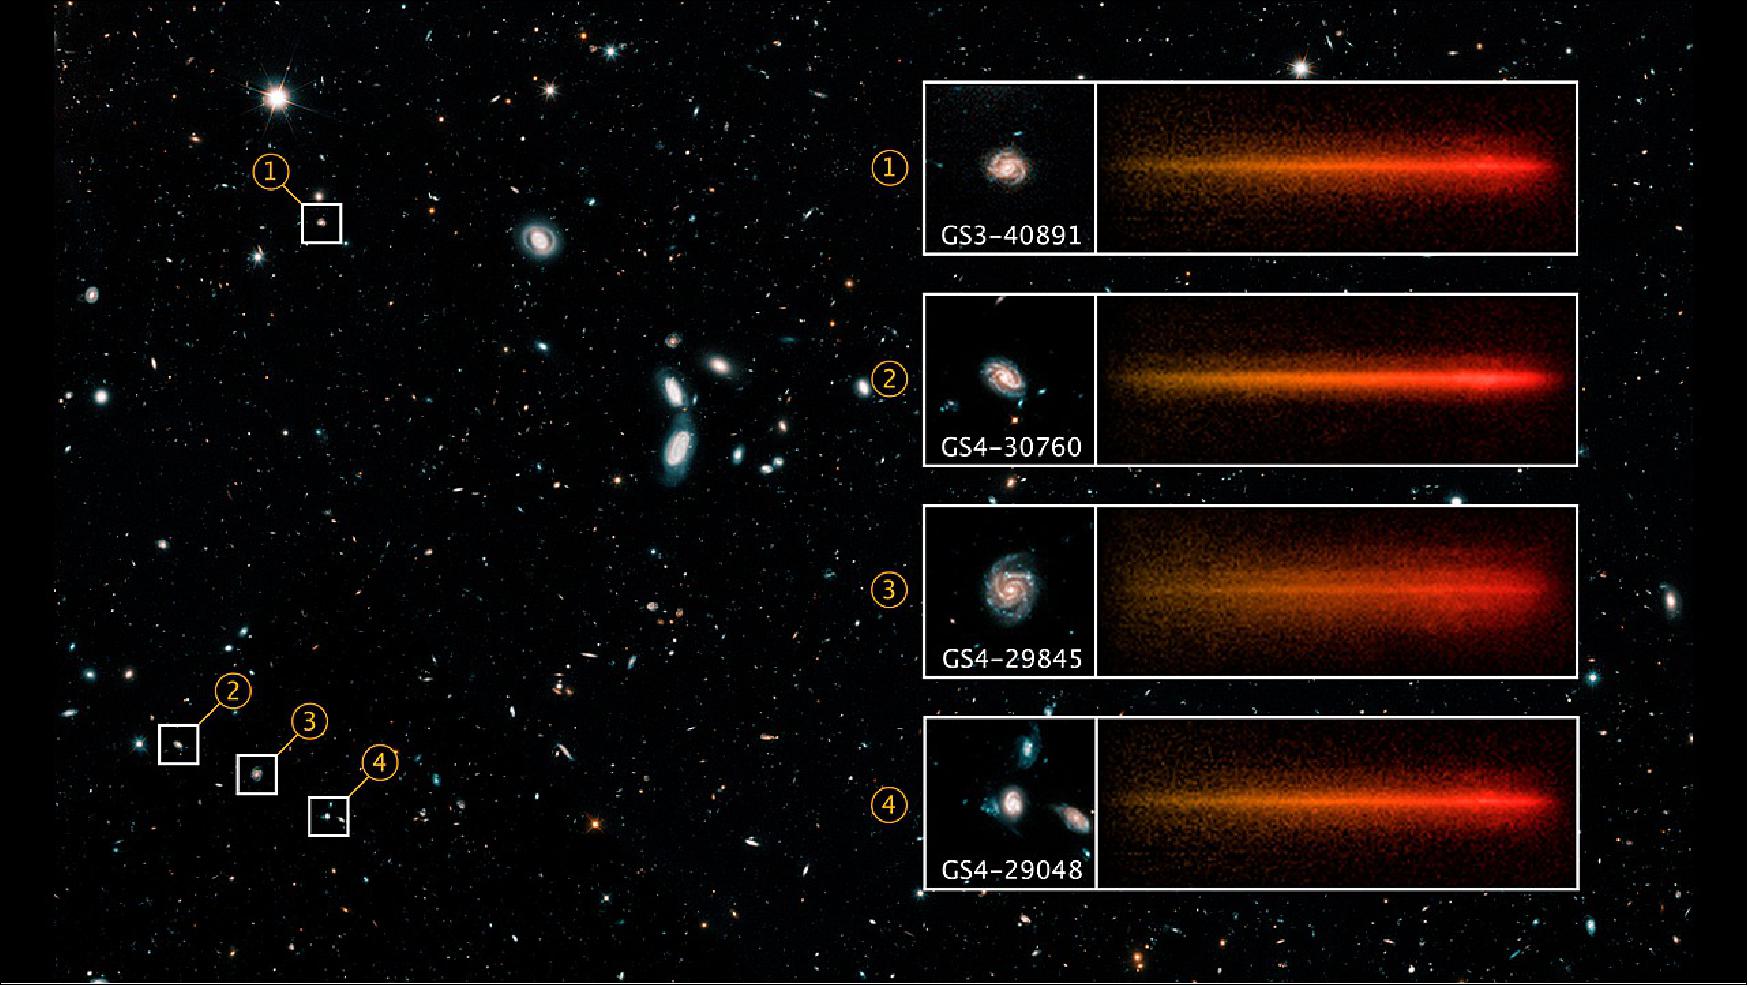 Figure 6: This Hubble image features four of the thousands of galaxies found within the Hubble Ultra Deep Field. All of the highlighted galaxies show evidence of vigorous star formation (blue regions filled with hot, young stars). In the insets at right, the near-infrared spectrum of each galaxy is displayed. By examining a galaxy’s spectrum, you can learn about the ages of its stars, its star-formation history, how many heavy chemical elements it contains, and more. - Upon entering operations in 2027, the Nancy Grace Roman Space Telescope will be able to collect spectra for every object in its field of view, which is 200 times larger than Hubble’s in infrared light. As a result, it will enable studies of rare galaxies from a period known as “cosmic noon,” when many galaxies went through growth spurts [image credit: SCIENCE: NASA, ESA, STScI, Casey Papovich (TAMU), IMAGE PROCESSING: Alyssa Pagan (STScI)]